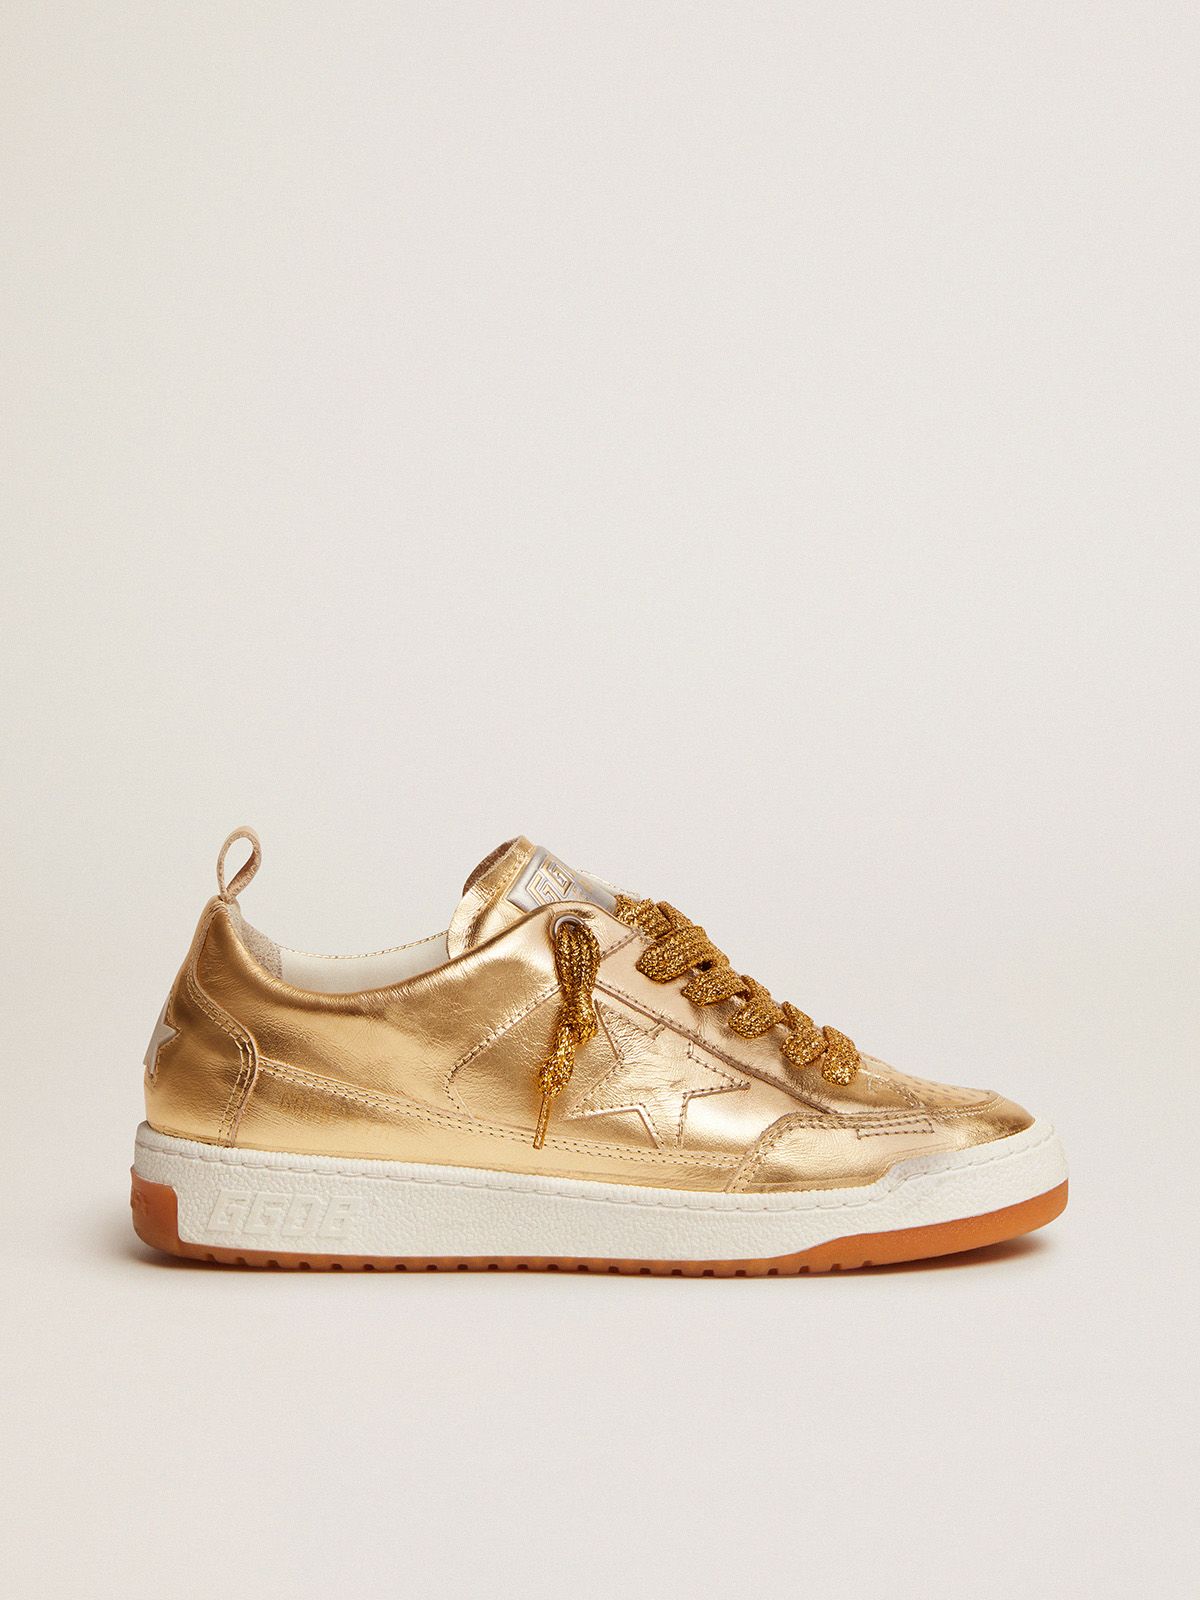 golden goose in gold leather laminated sneakers Yeah